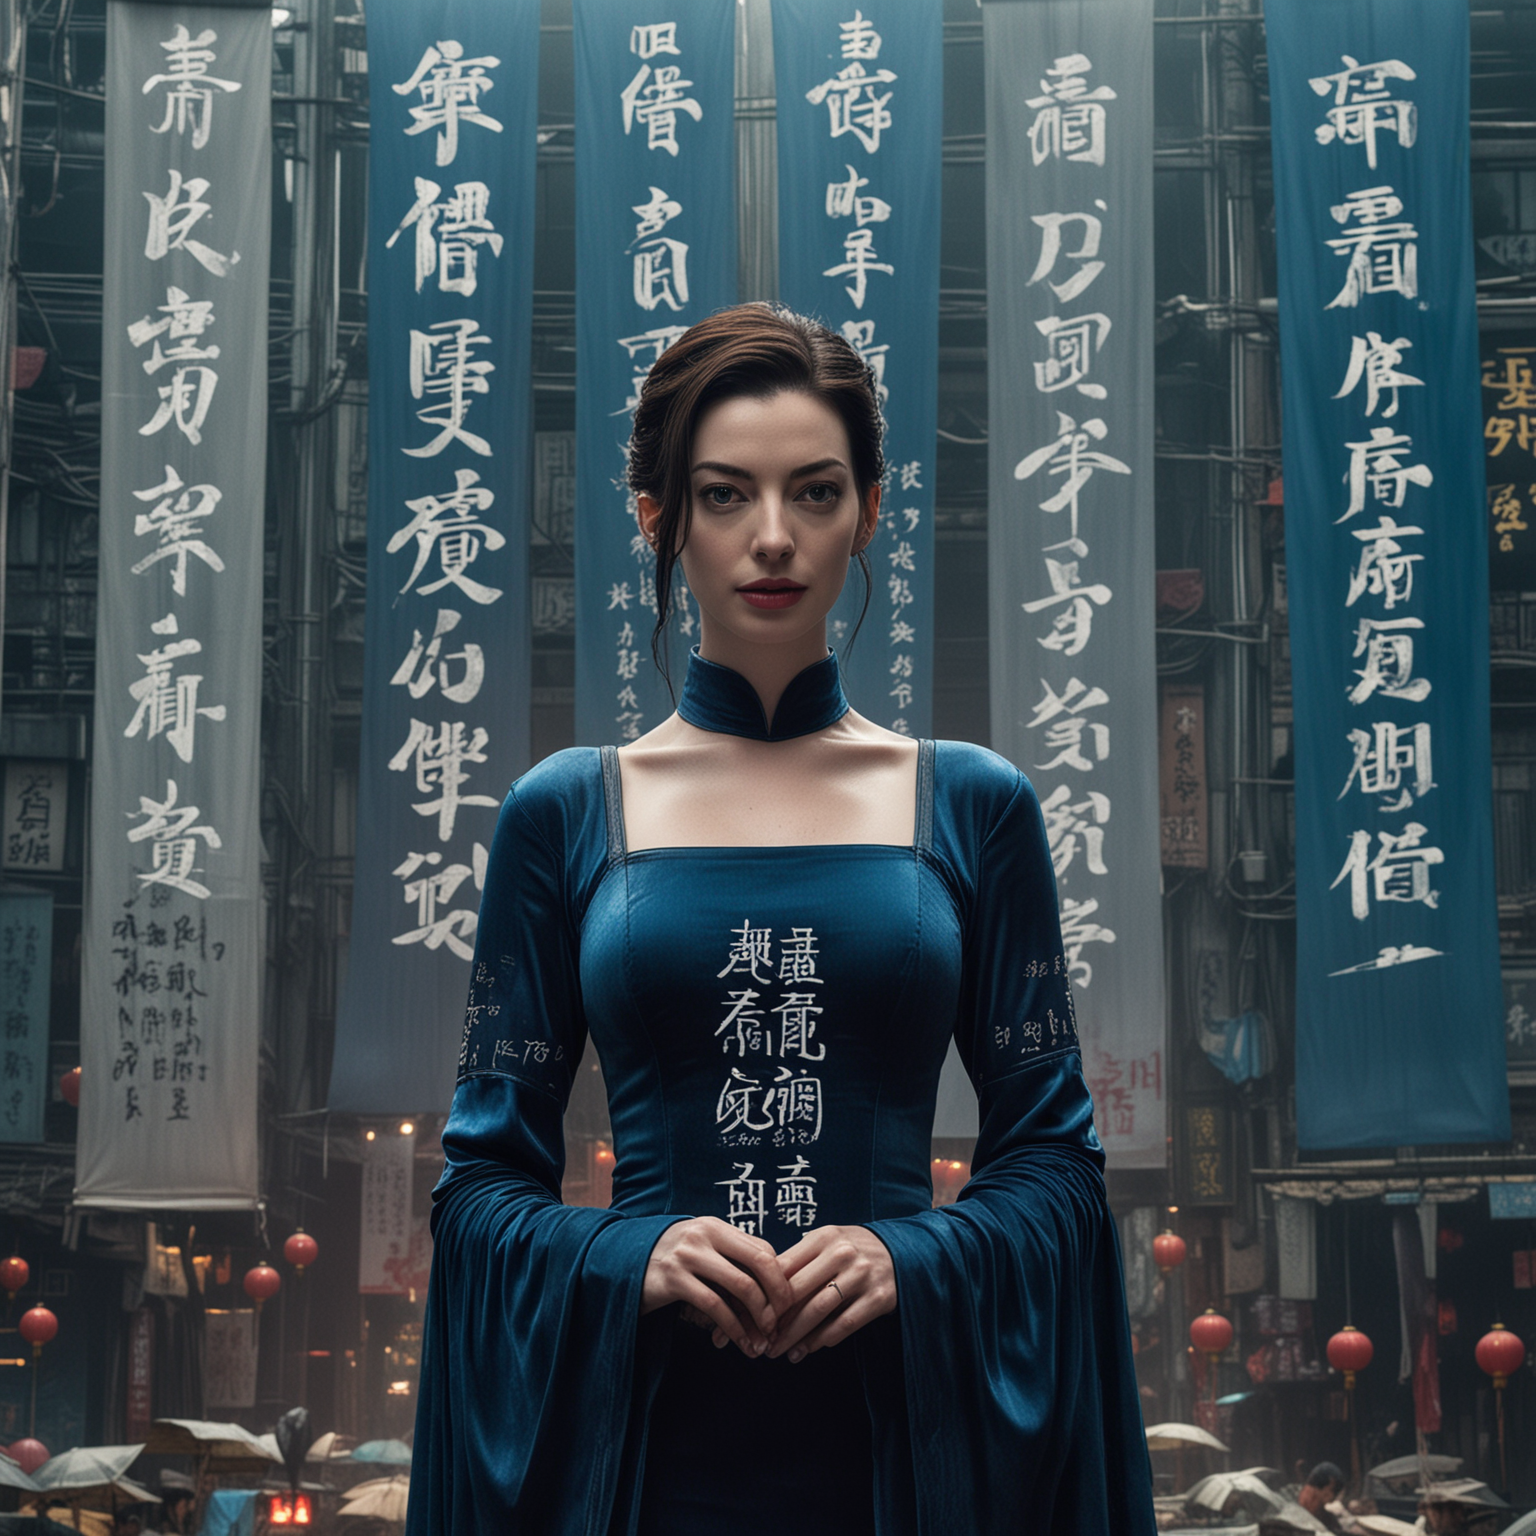 anne hathaway in blue velvet dress 
surrounded by banners with chinese writing in a cyberpunk setting